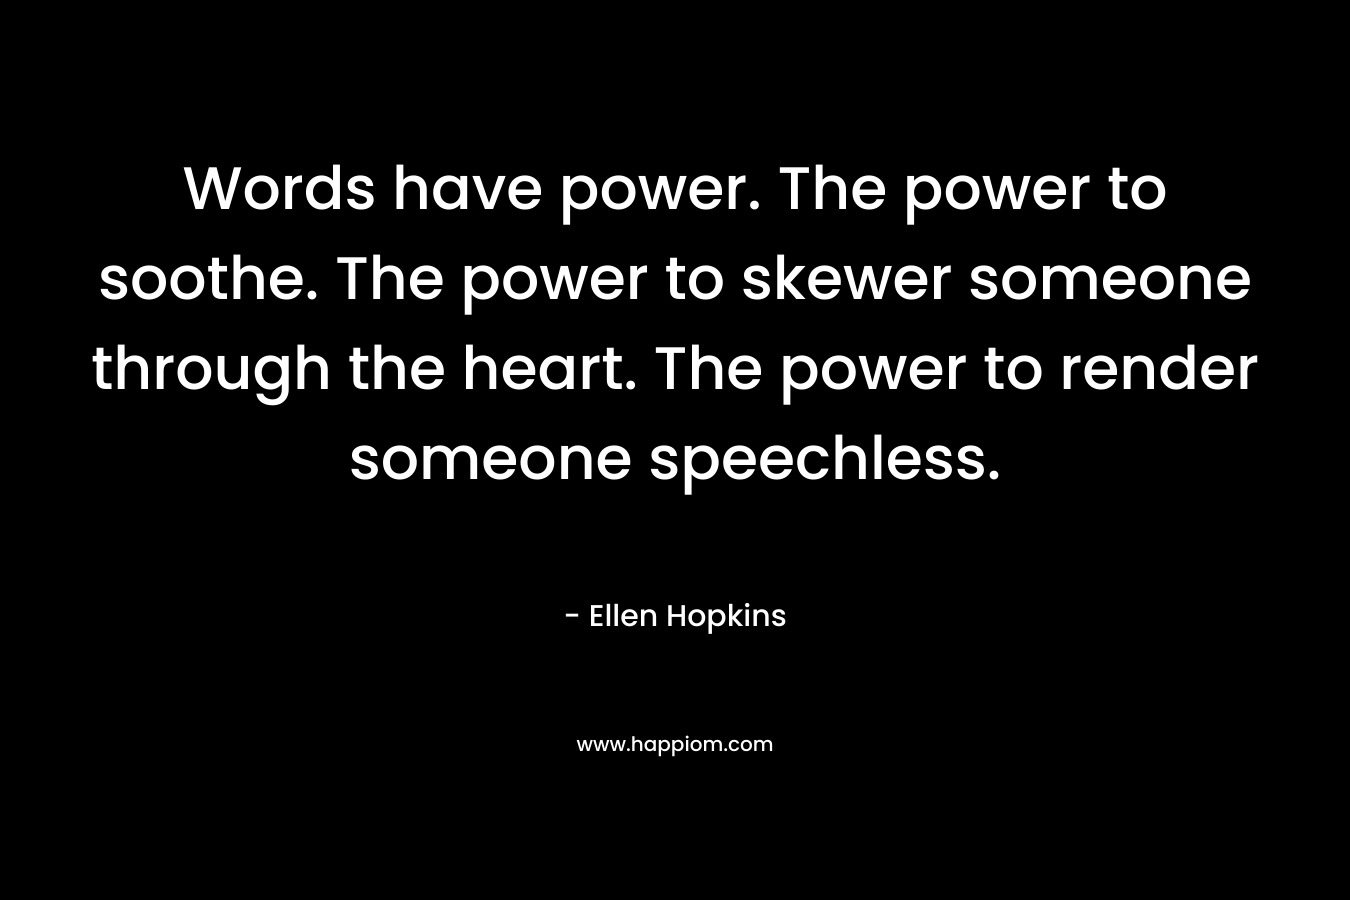 Words have power. The power to soothe. The power to skewer someone through the heart. The power to render someone speechless.